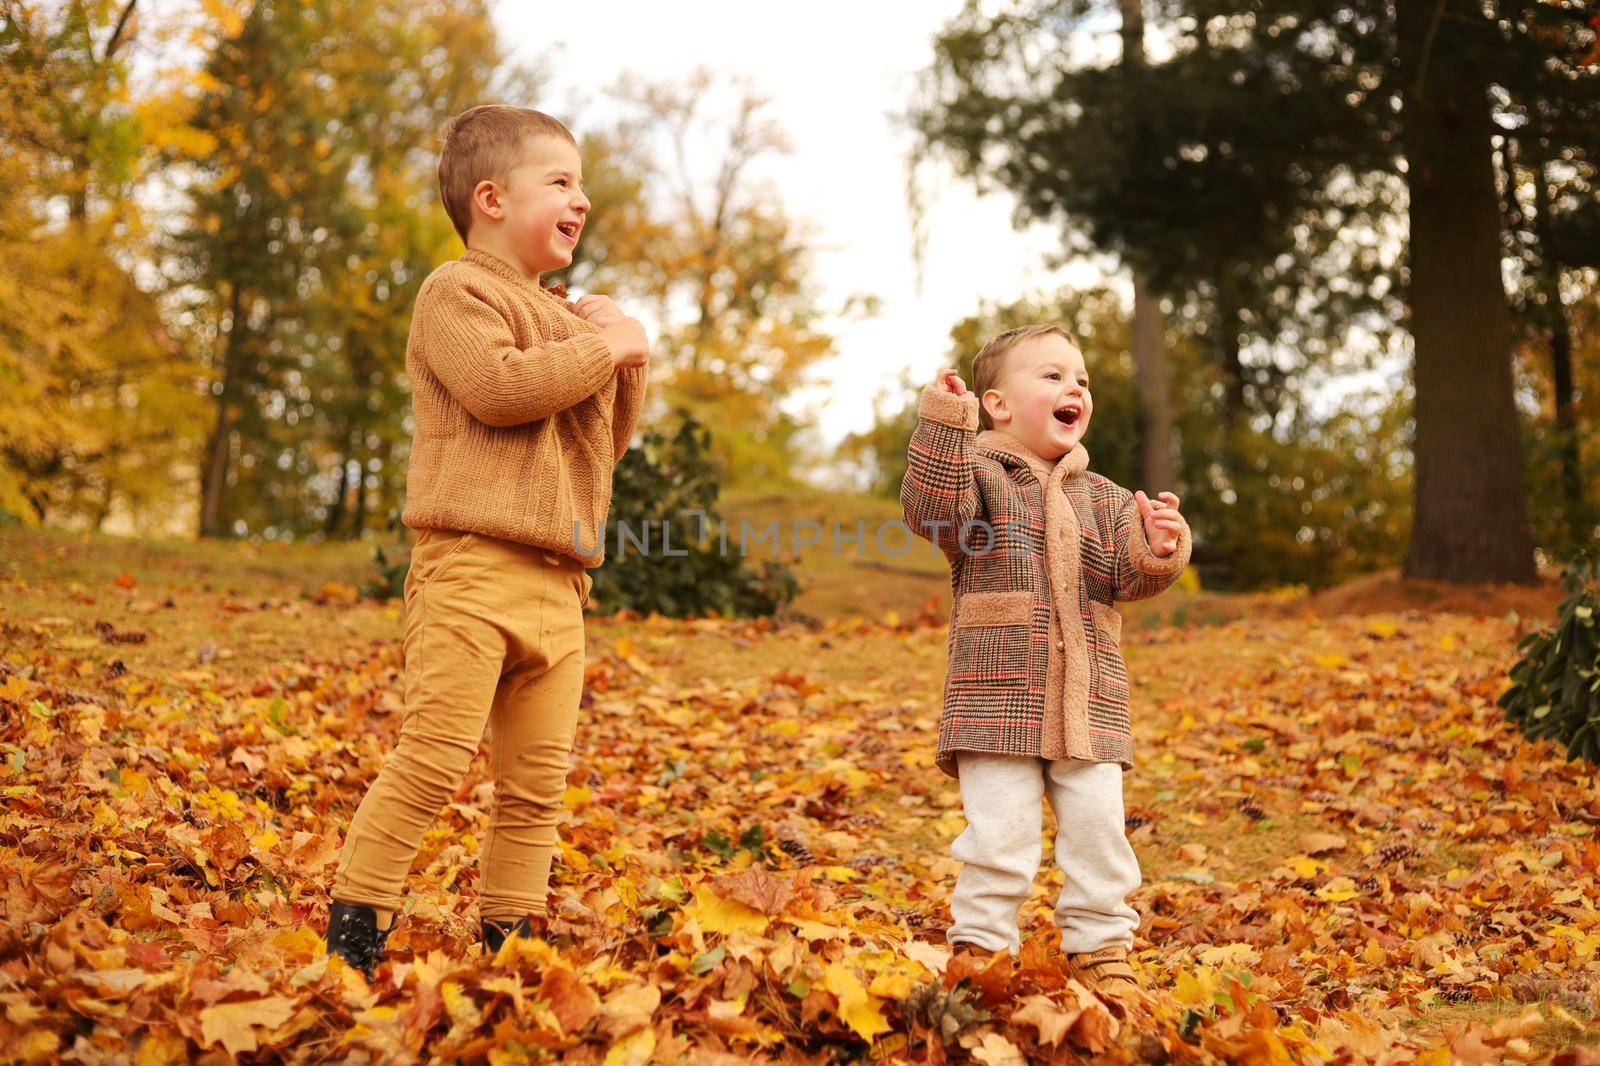 Outdoor fun in autumn. Children playing with autumn fallen leaves in park. Happy little friends. by creativebird